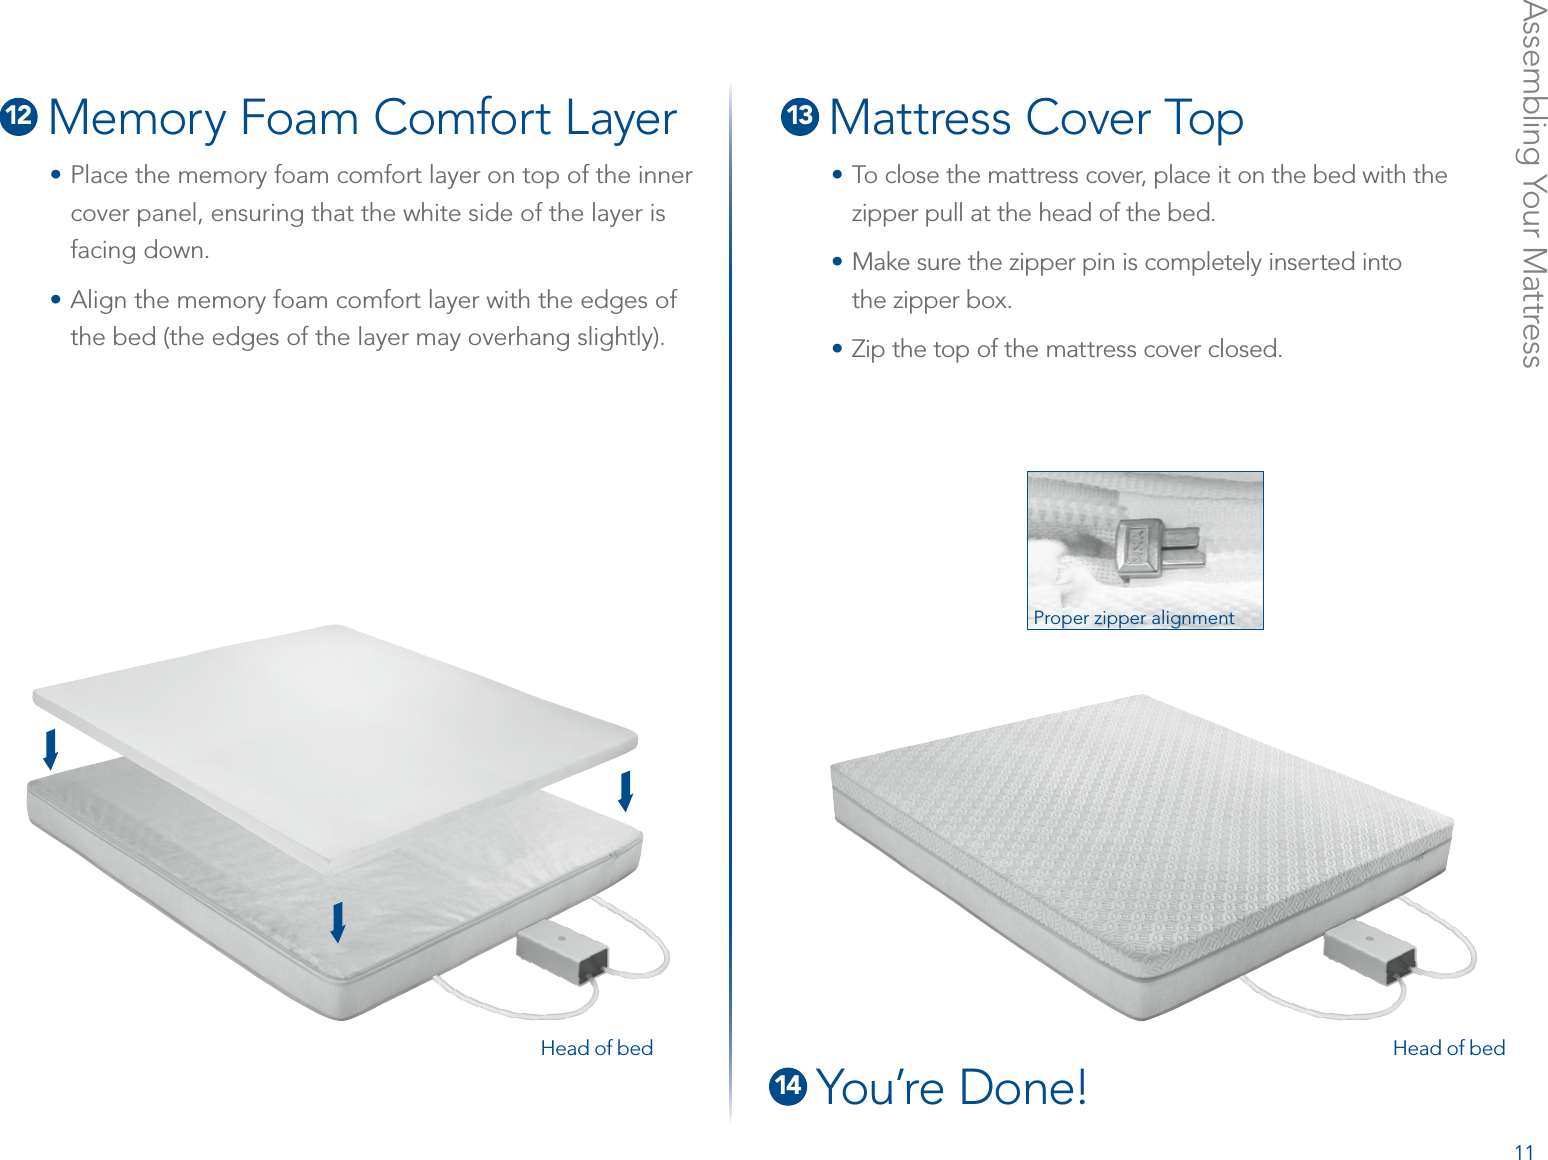 Assembling Your Mattress12  Memory Foam Comfort Layer• Place the memory foam comfort layer on top of the inner cover panel, ensuring that the white side of the layer is facing down.• Align the memory foam comfort layer with the edges of the bed (the edges of the layer may overhang slightly).13  Mattress Cover Top•  To close the mattress cover, place it on the bed with the zipper pull at the head of the bed.• Make sure the zipper pin is completely inserted into  the zipper box.• Zip the top of the mattress cover closed.Proper zipper alignment14  You’re Done!Head of bed Head of bed11